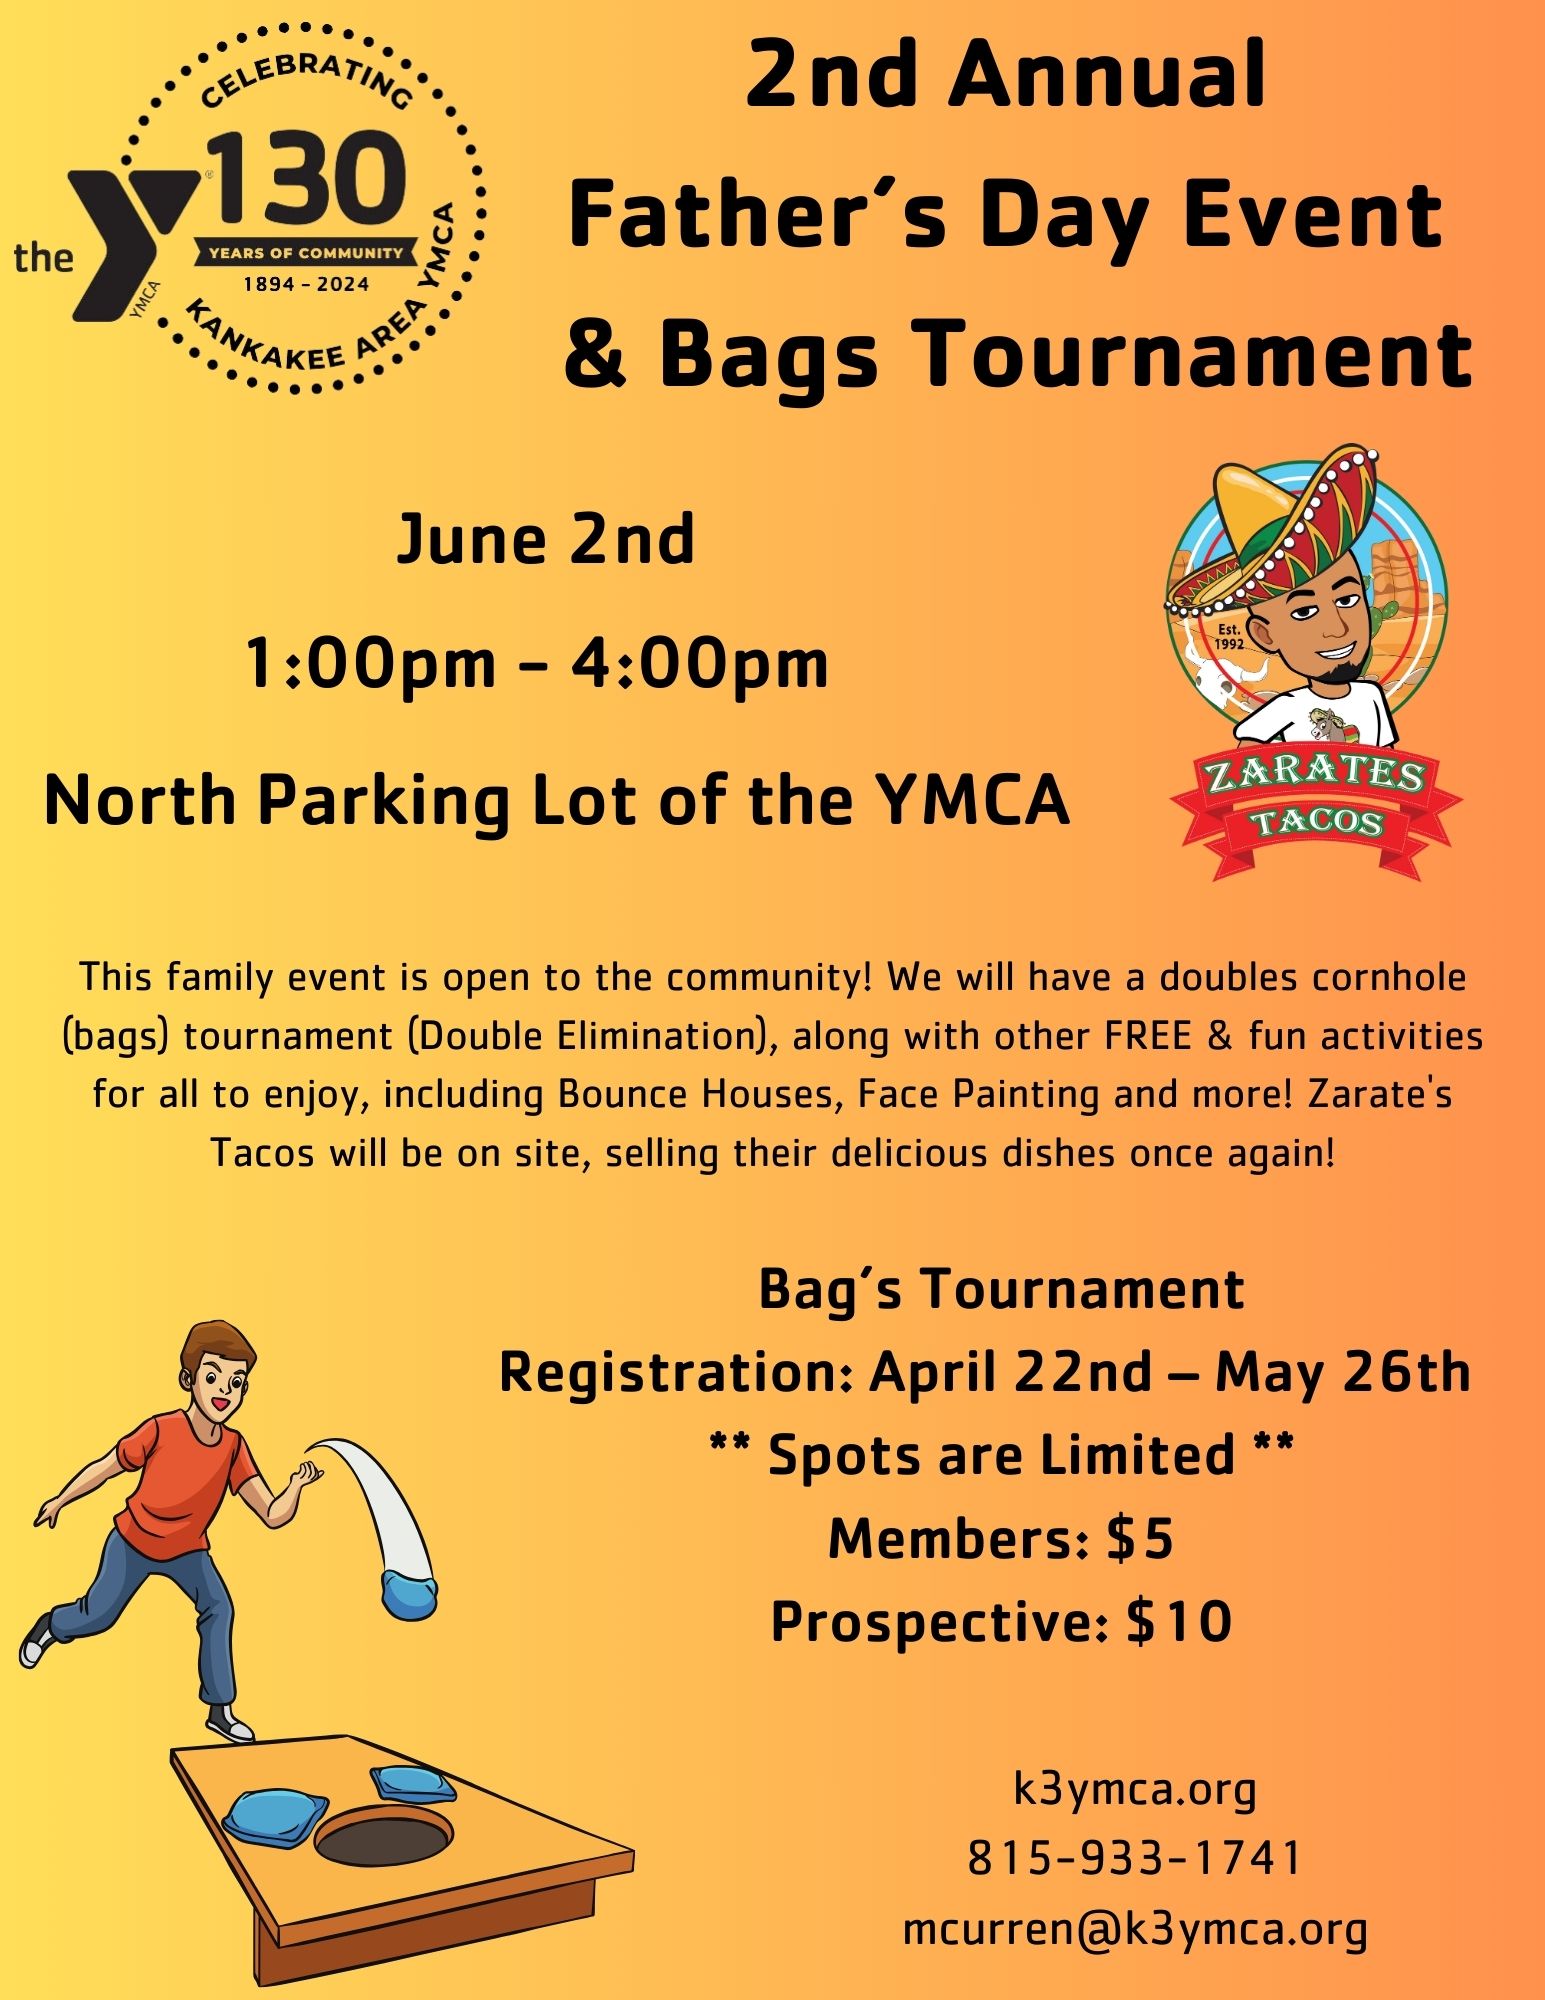 2nd Annual Father's Day Event & Bags Tournament